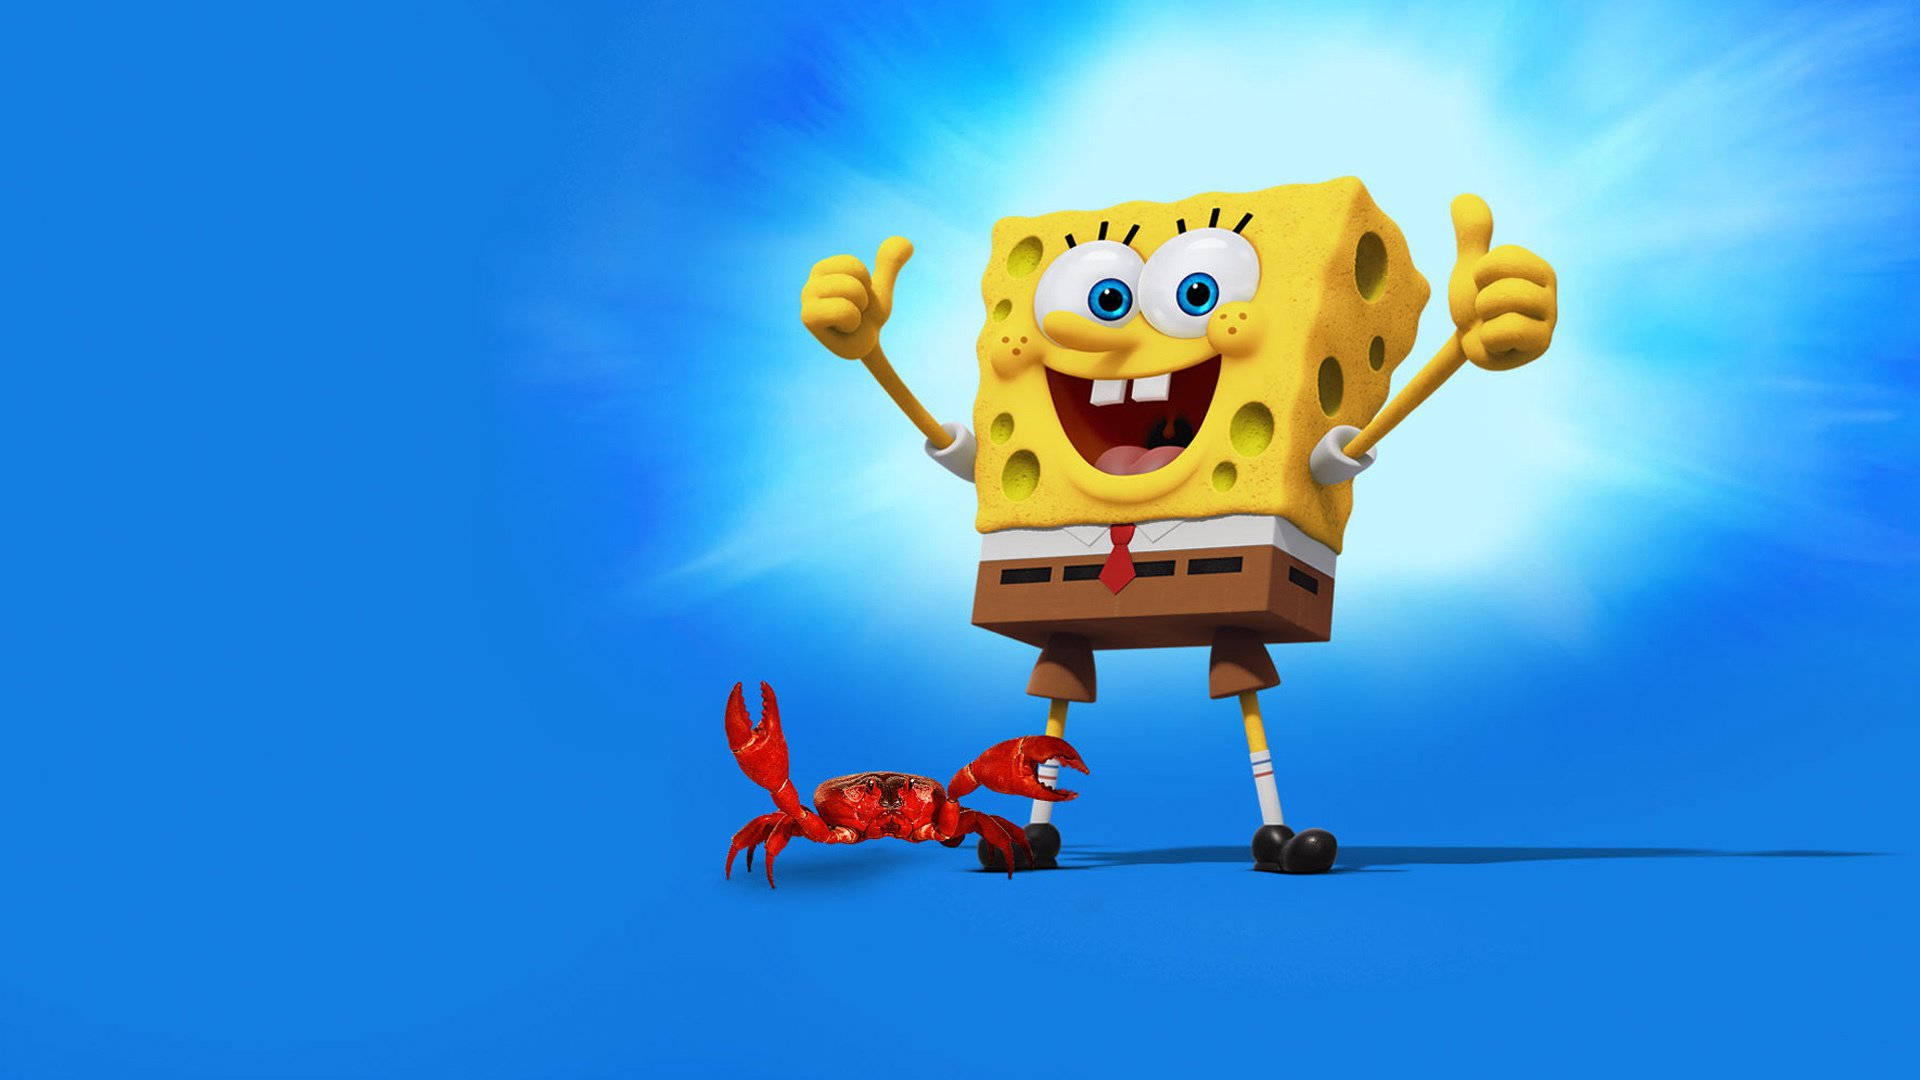 Funny Spongebob Giving A Thumbs Up Background